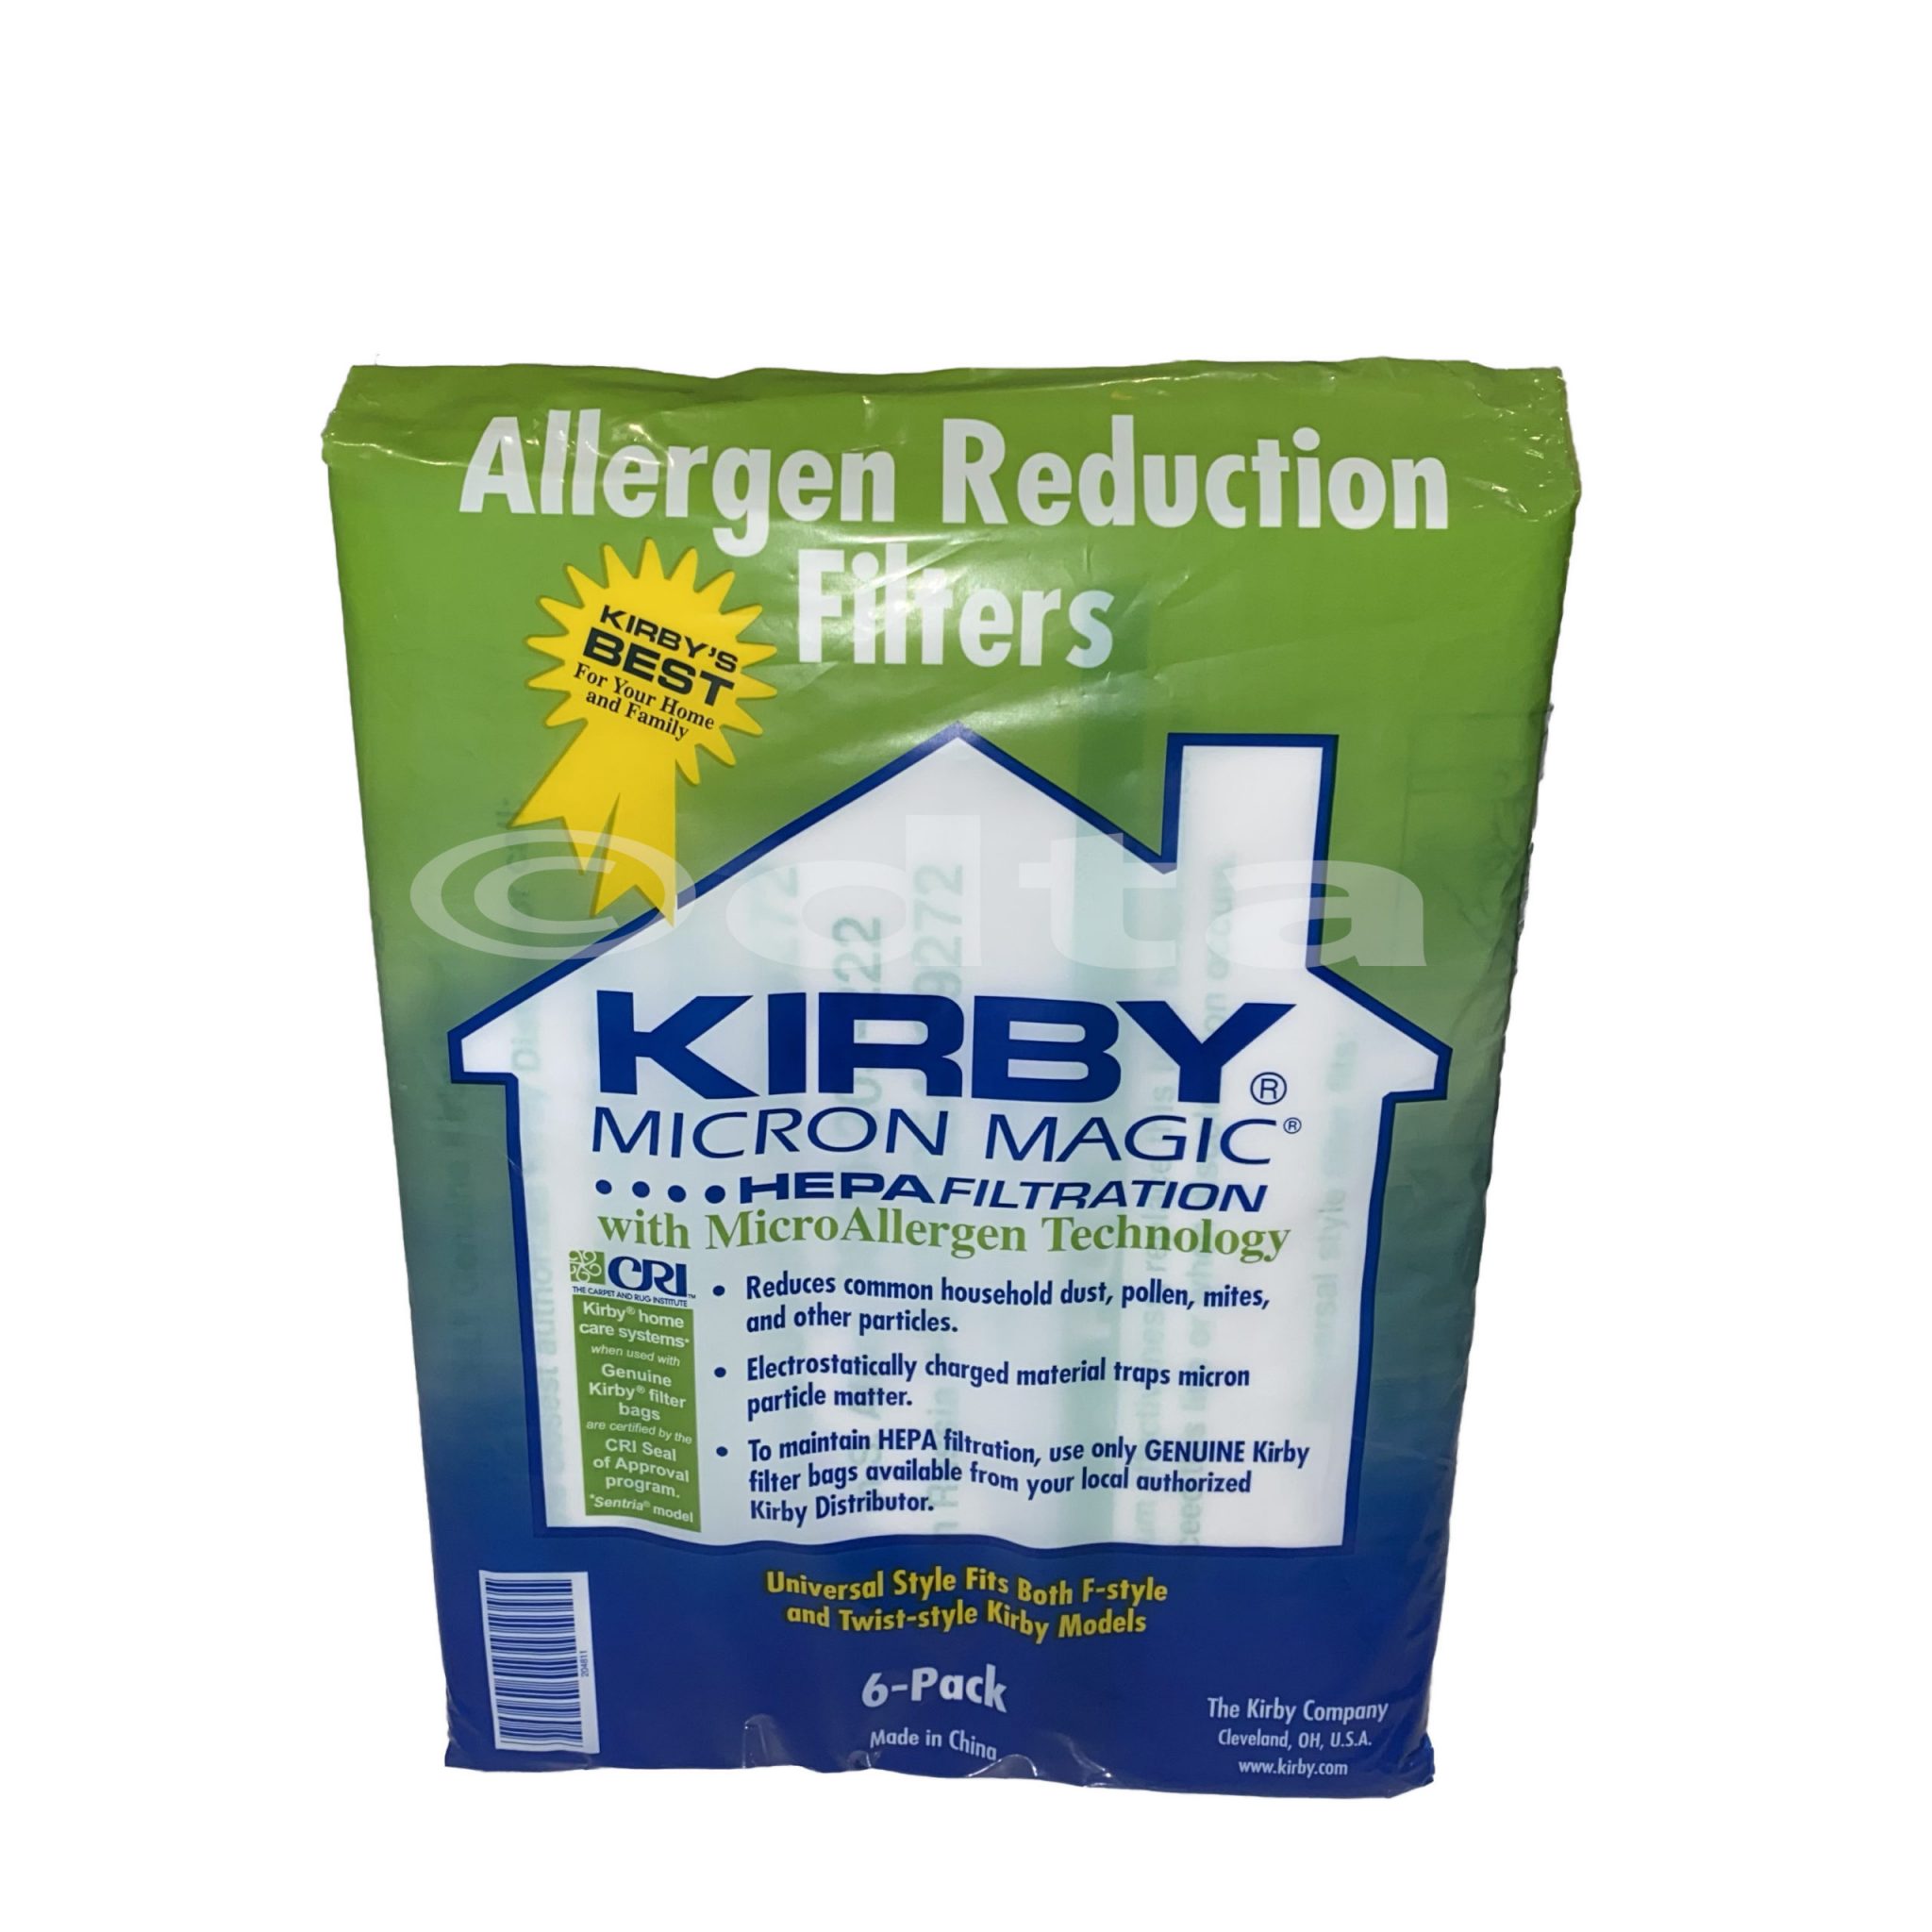 KIRBY Micron Magic Allergen Reduction Filter Vacuum Cleaner Bags 6 Universal Fit 